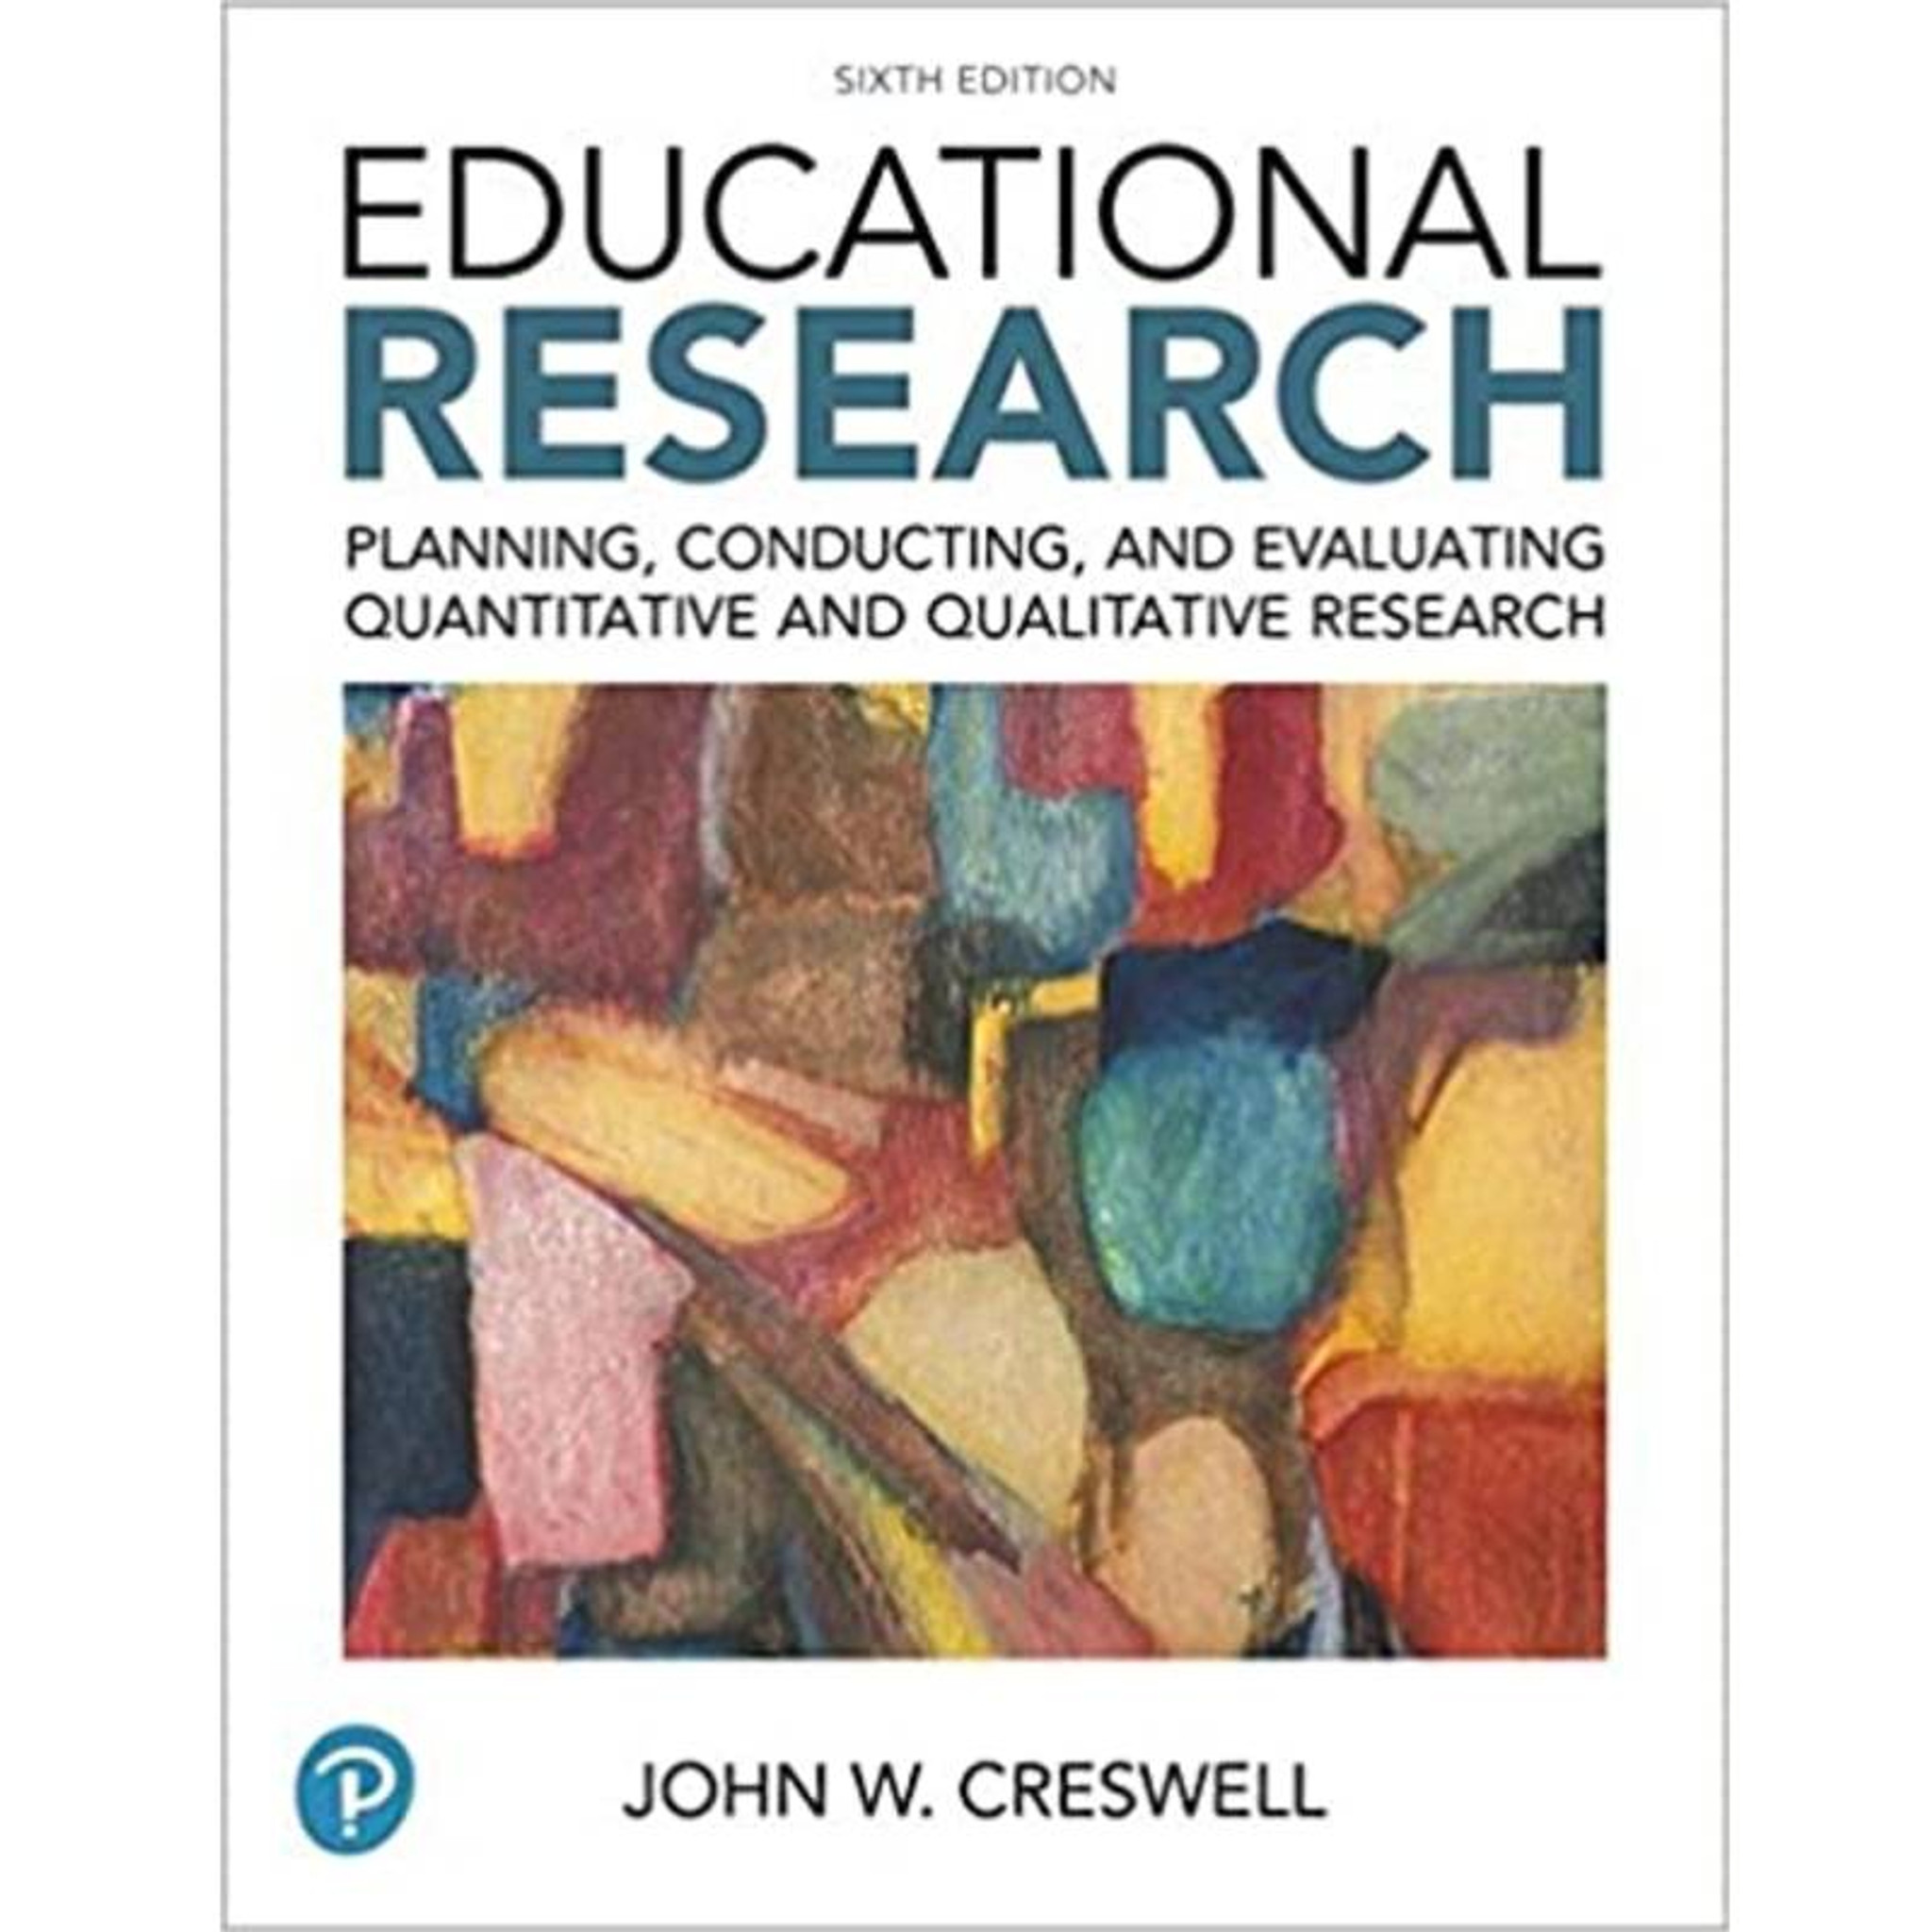 what is qualitative research according to creswell 2013